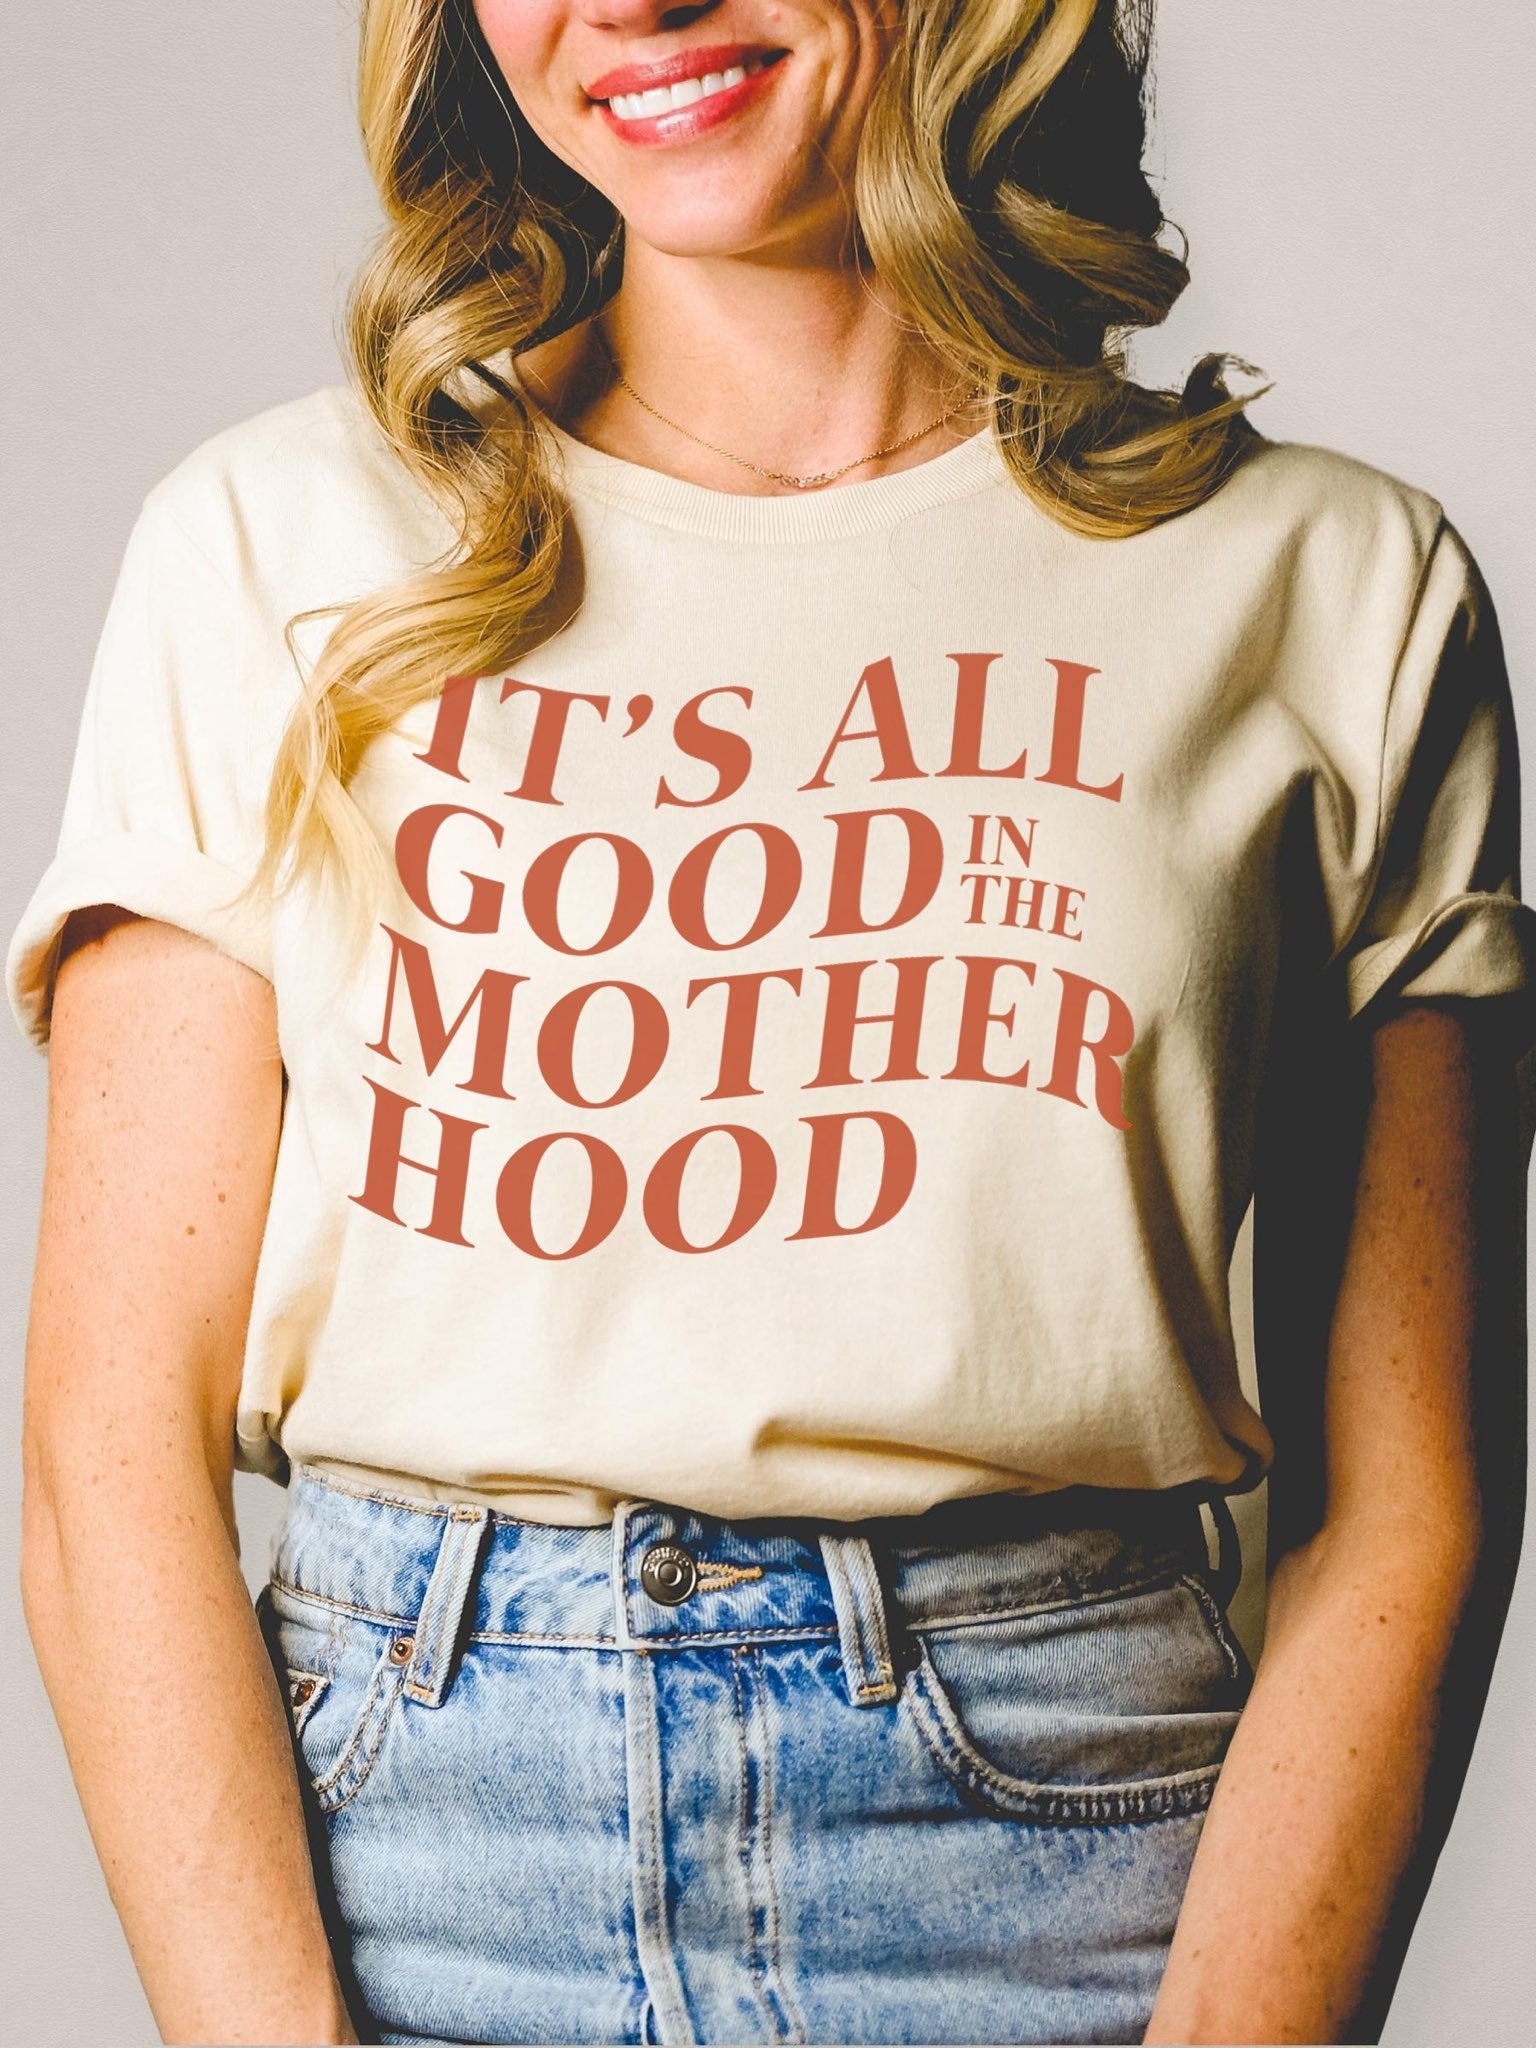 It's Good in the Mother Hood | Women's T-Shirt | Ruby's Rubbish®